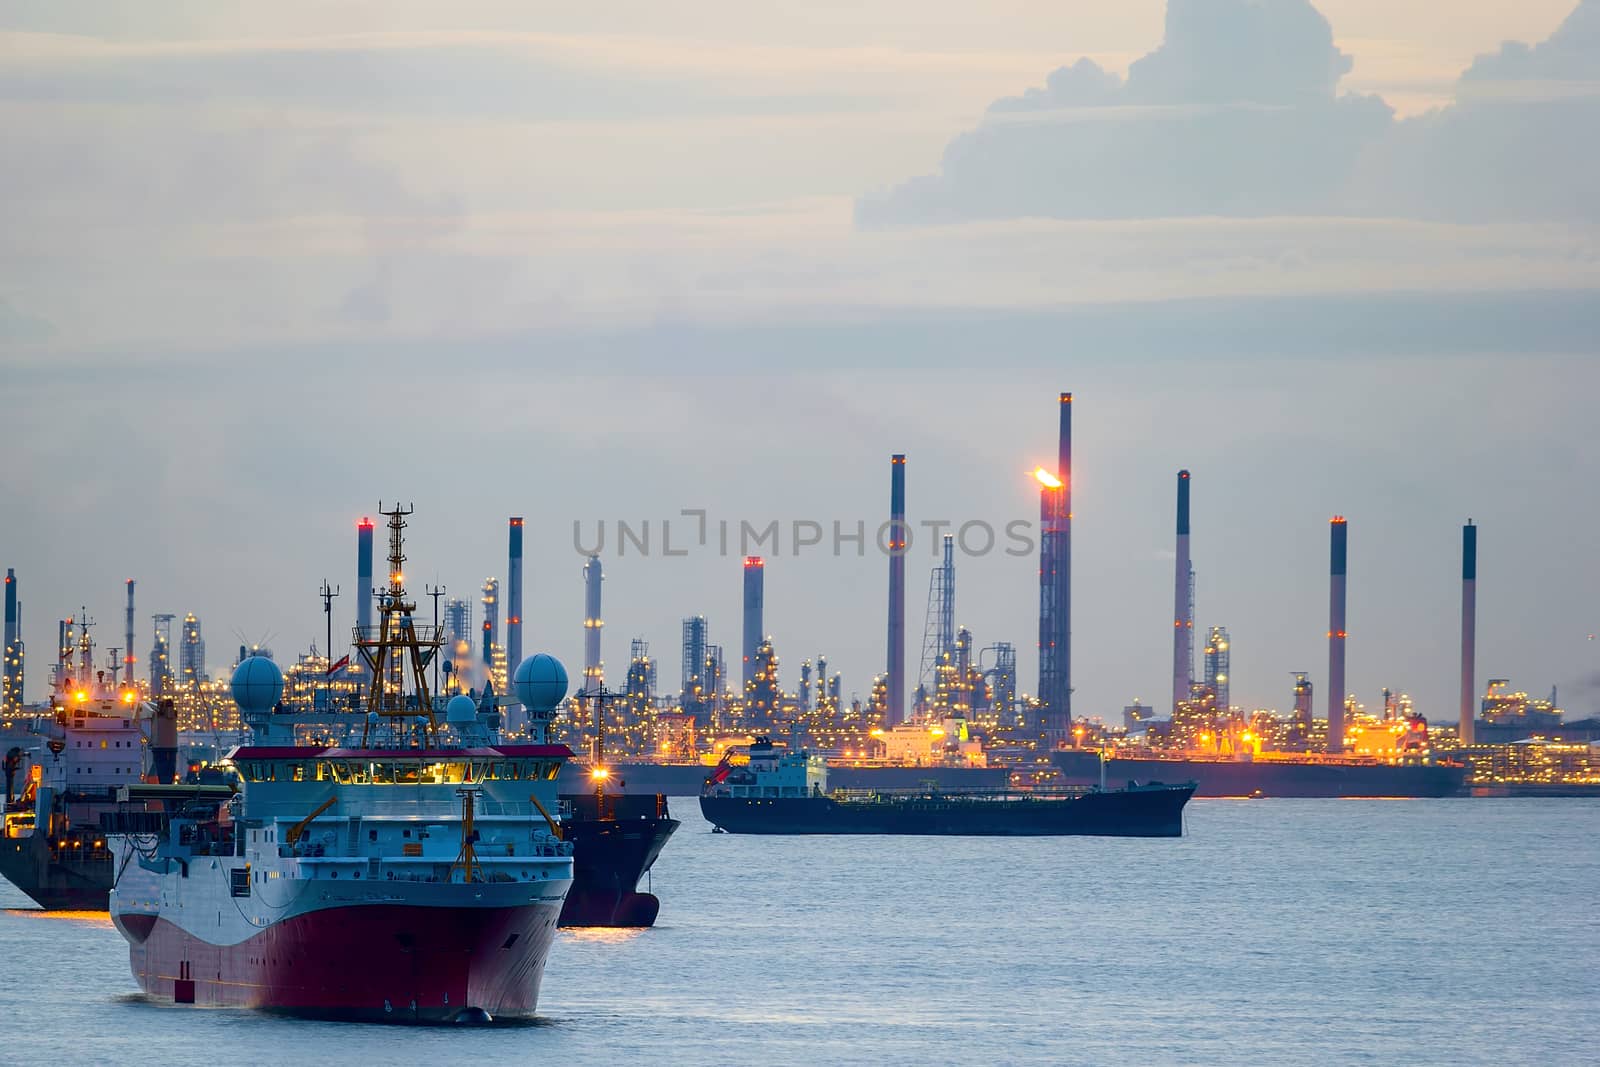 Seismic survey vessel and cargo container ships off the coast of Singapore Island Petroleum Chemical Refinery Plants